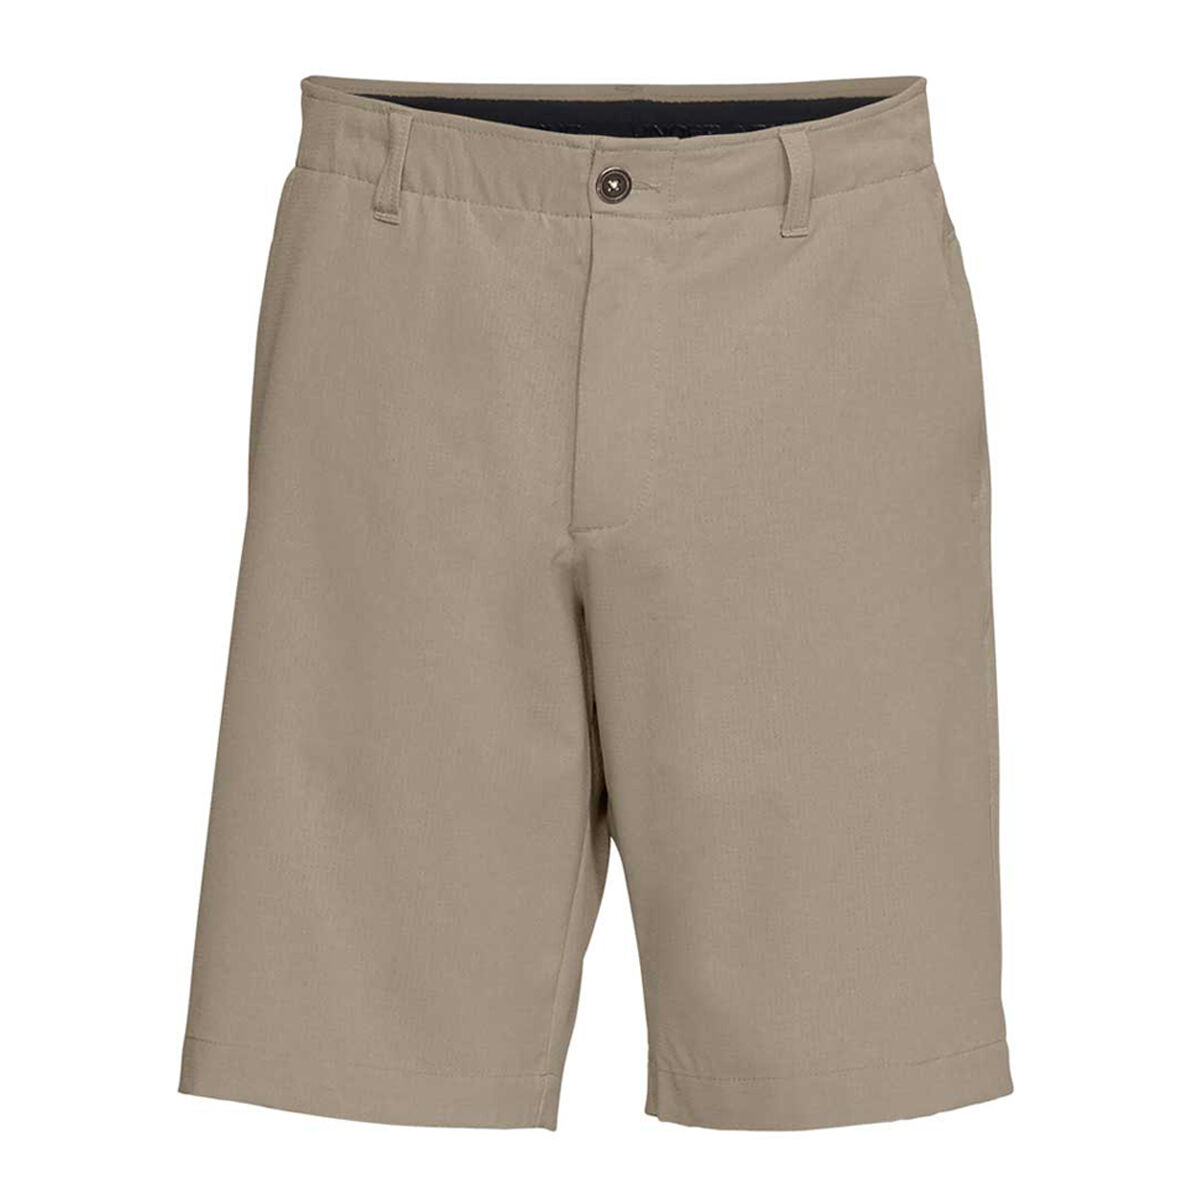 under armour golf shorts on sale